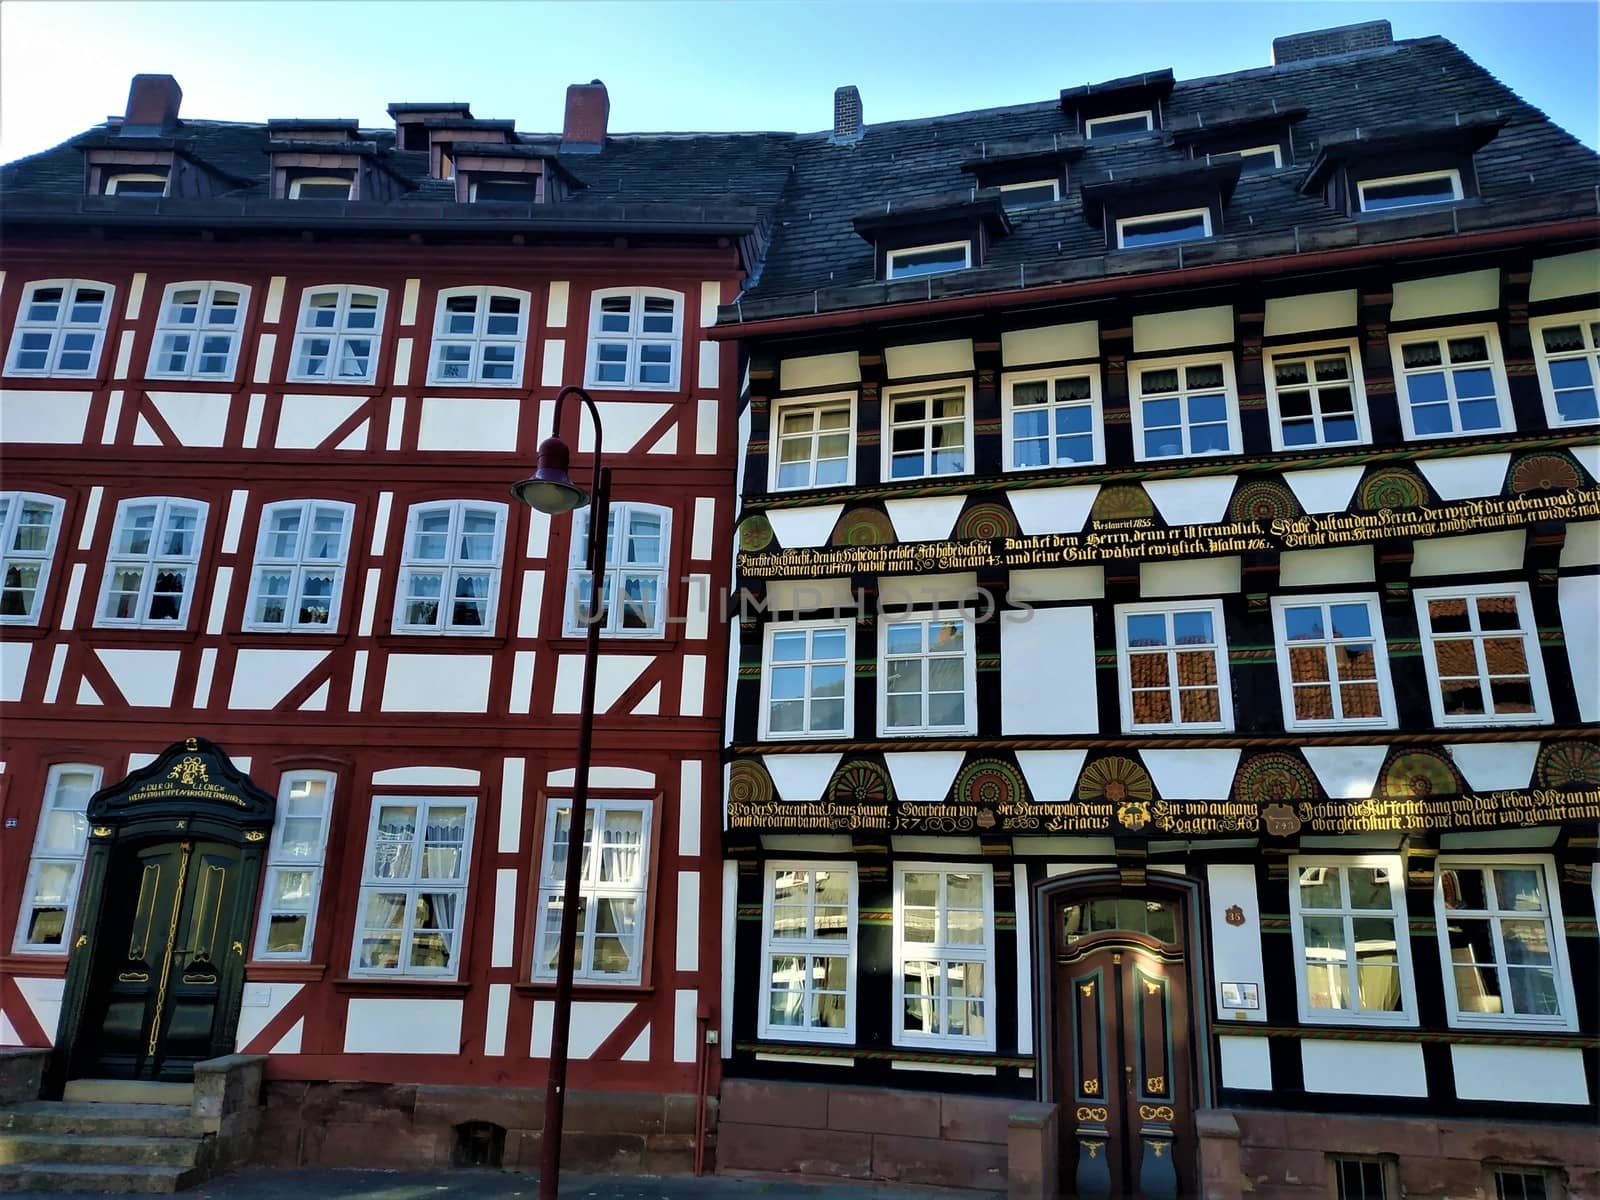 Beautiful half-timbered house in the old town of Einbeck by pisces2386